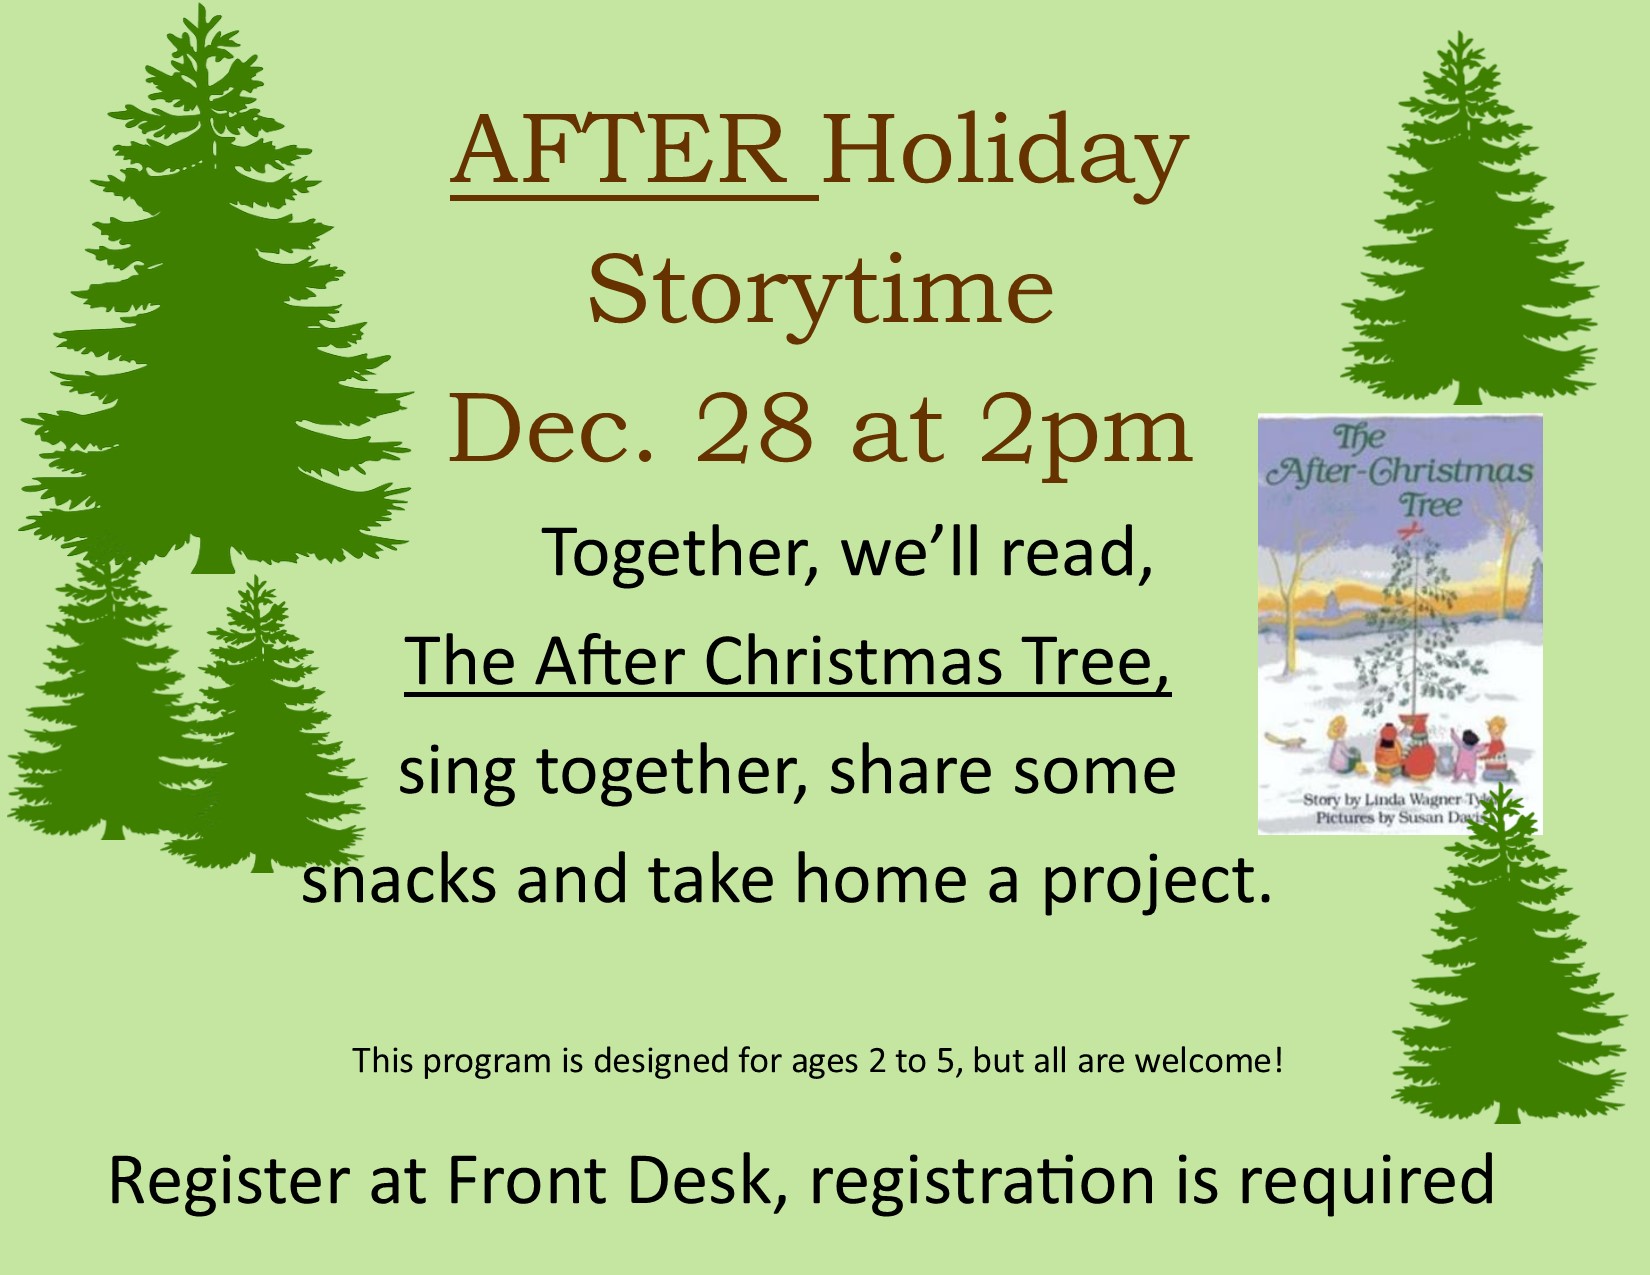 Poster showcasing our upcoming After Holiday story time